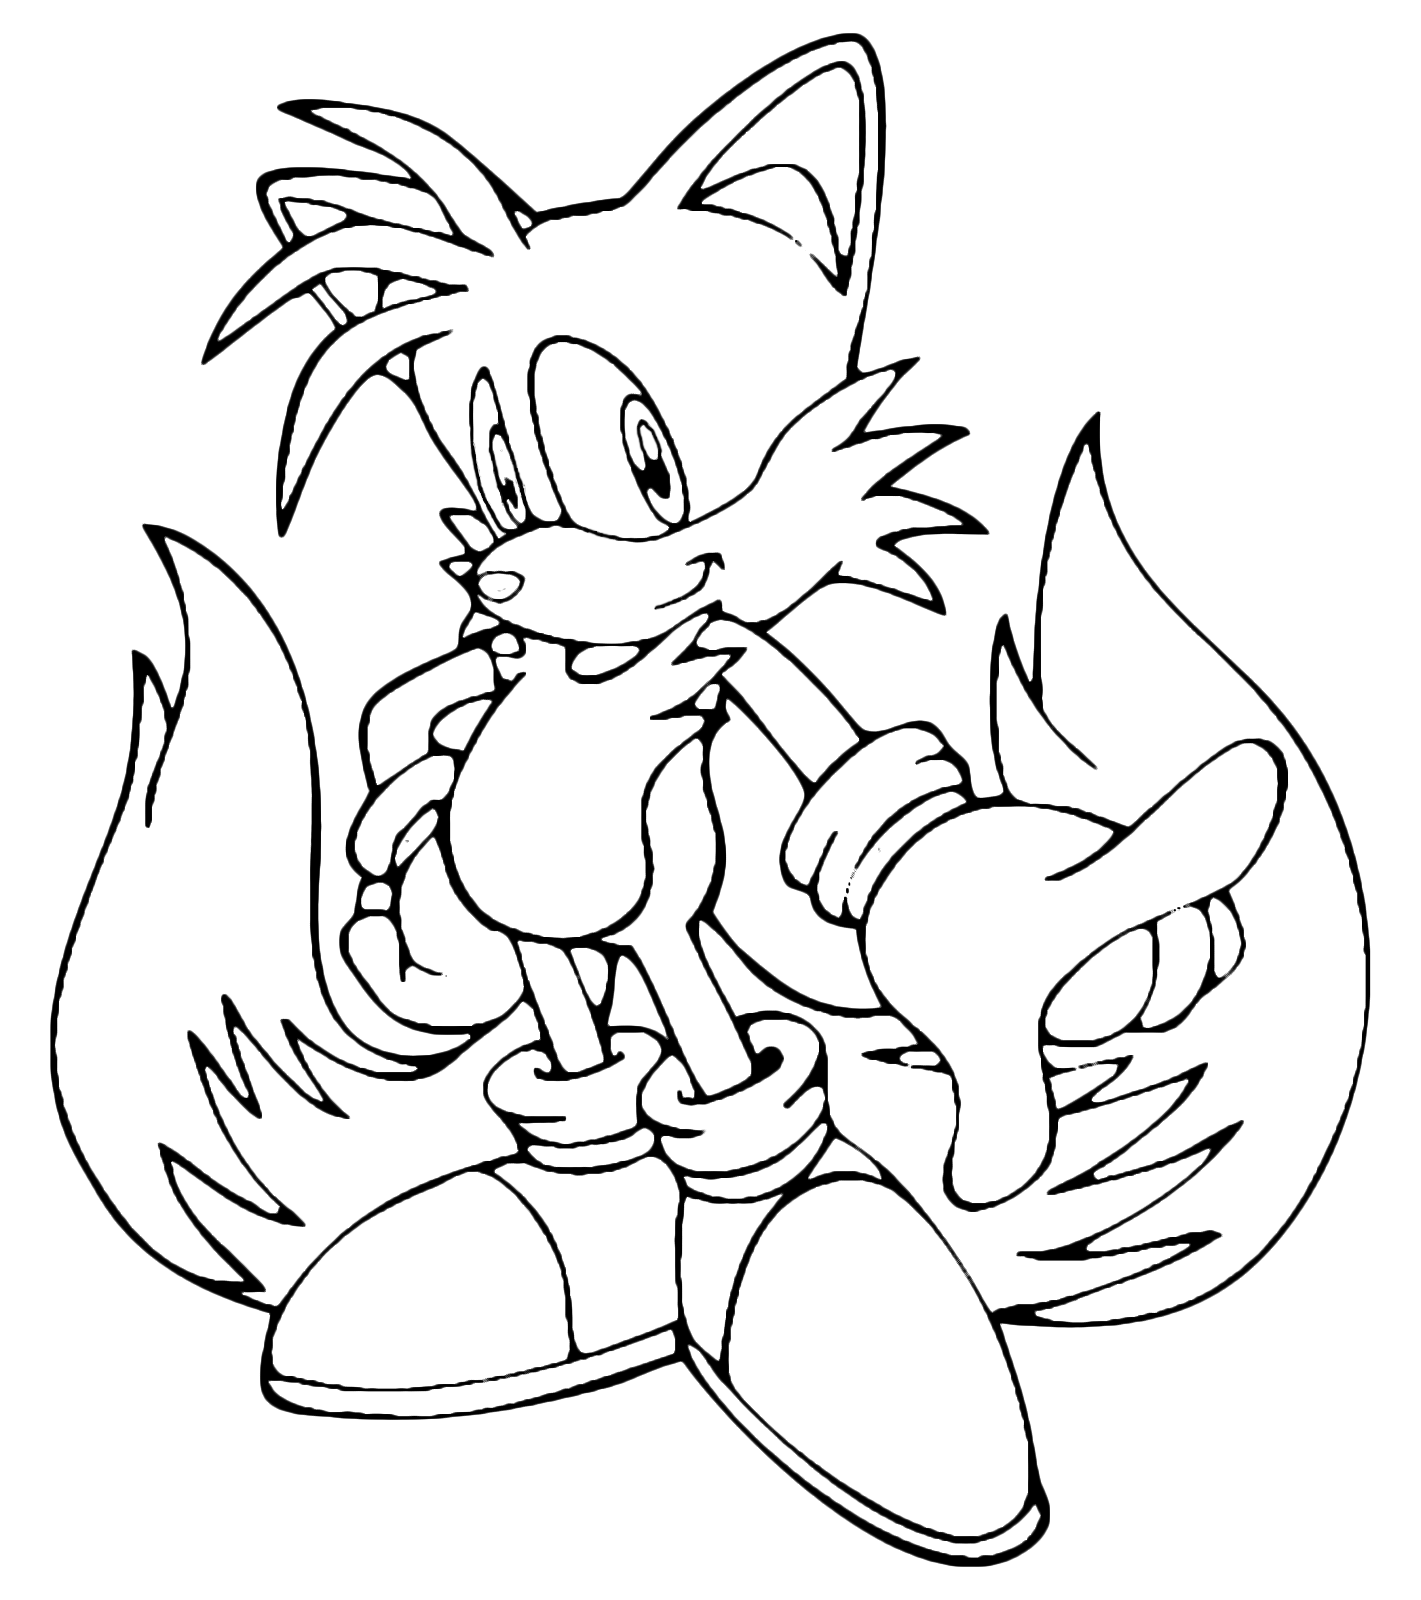 Free Printable Tails The Fox Coloring Pages Pdf - Free Tails The Fox Coloring Pages